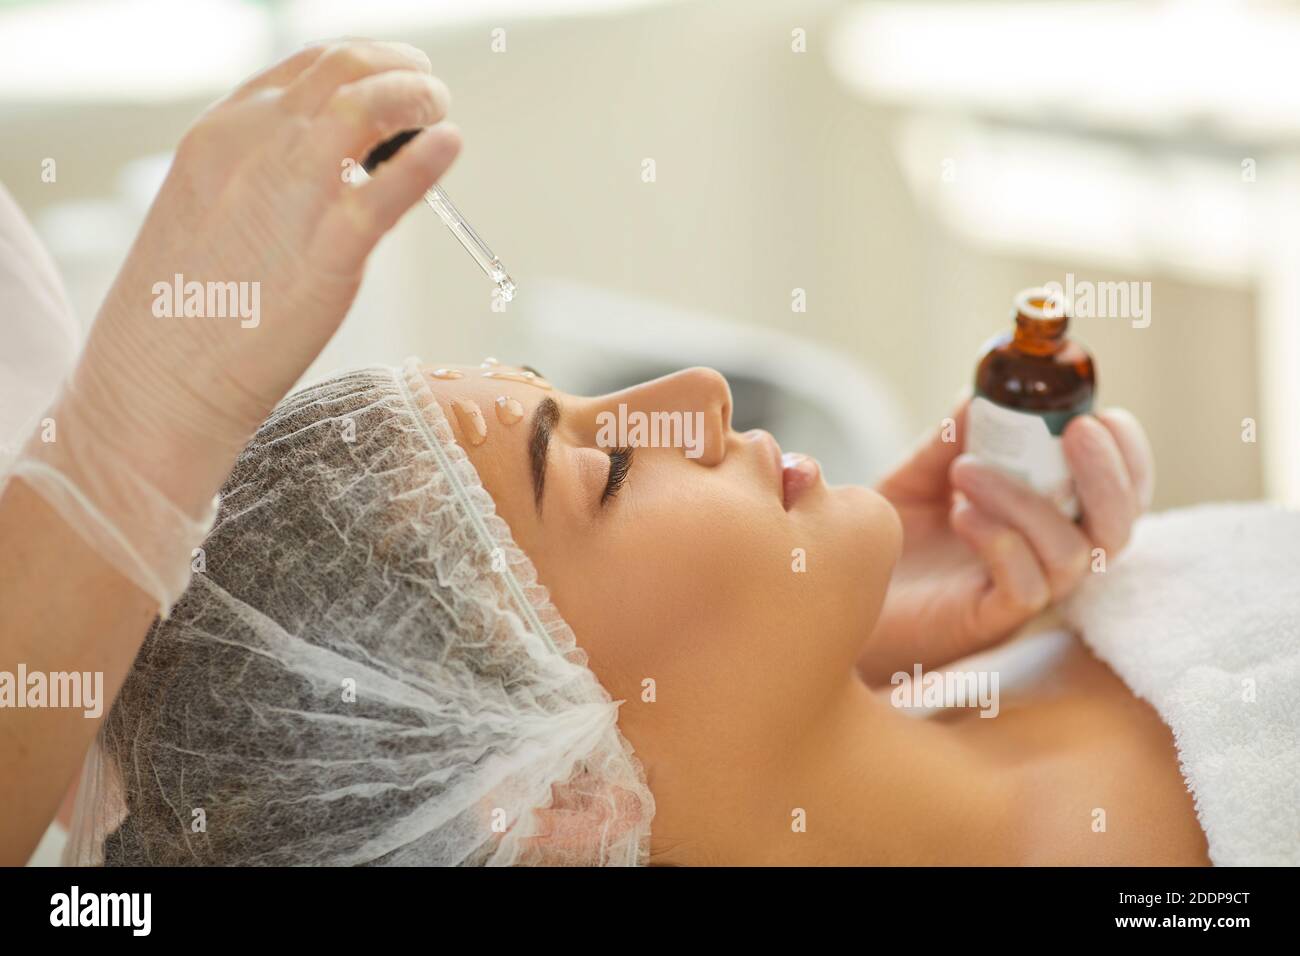 Hands of beautician dripping nourishing oil on forehead and facial skin of young woman Stock Photo